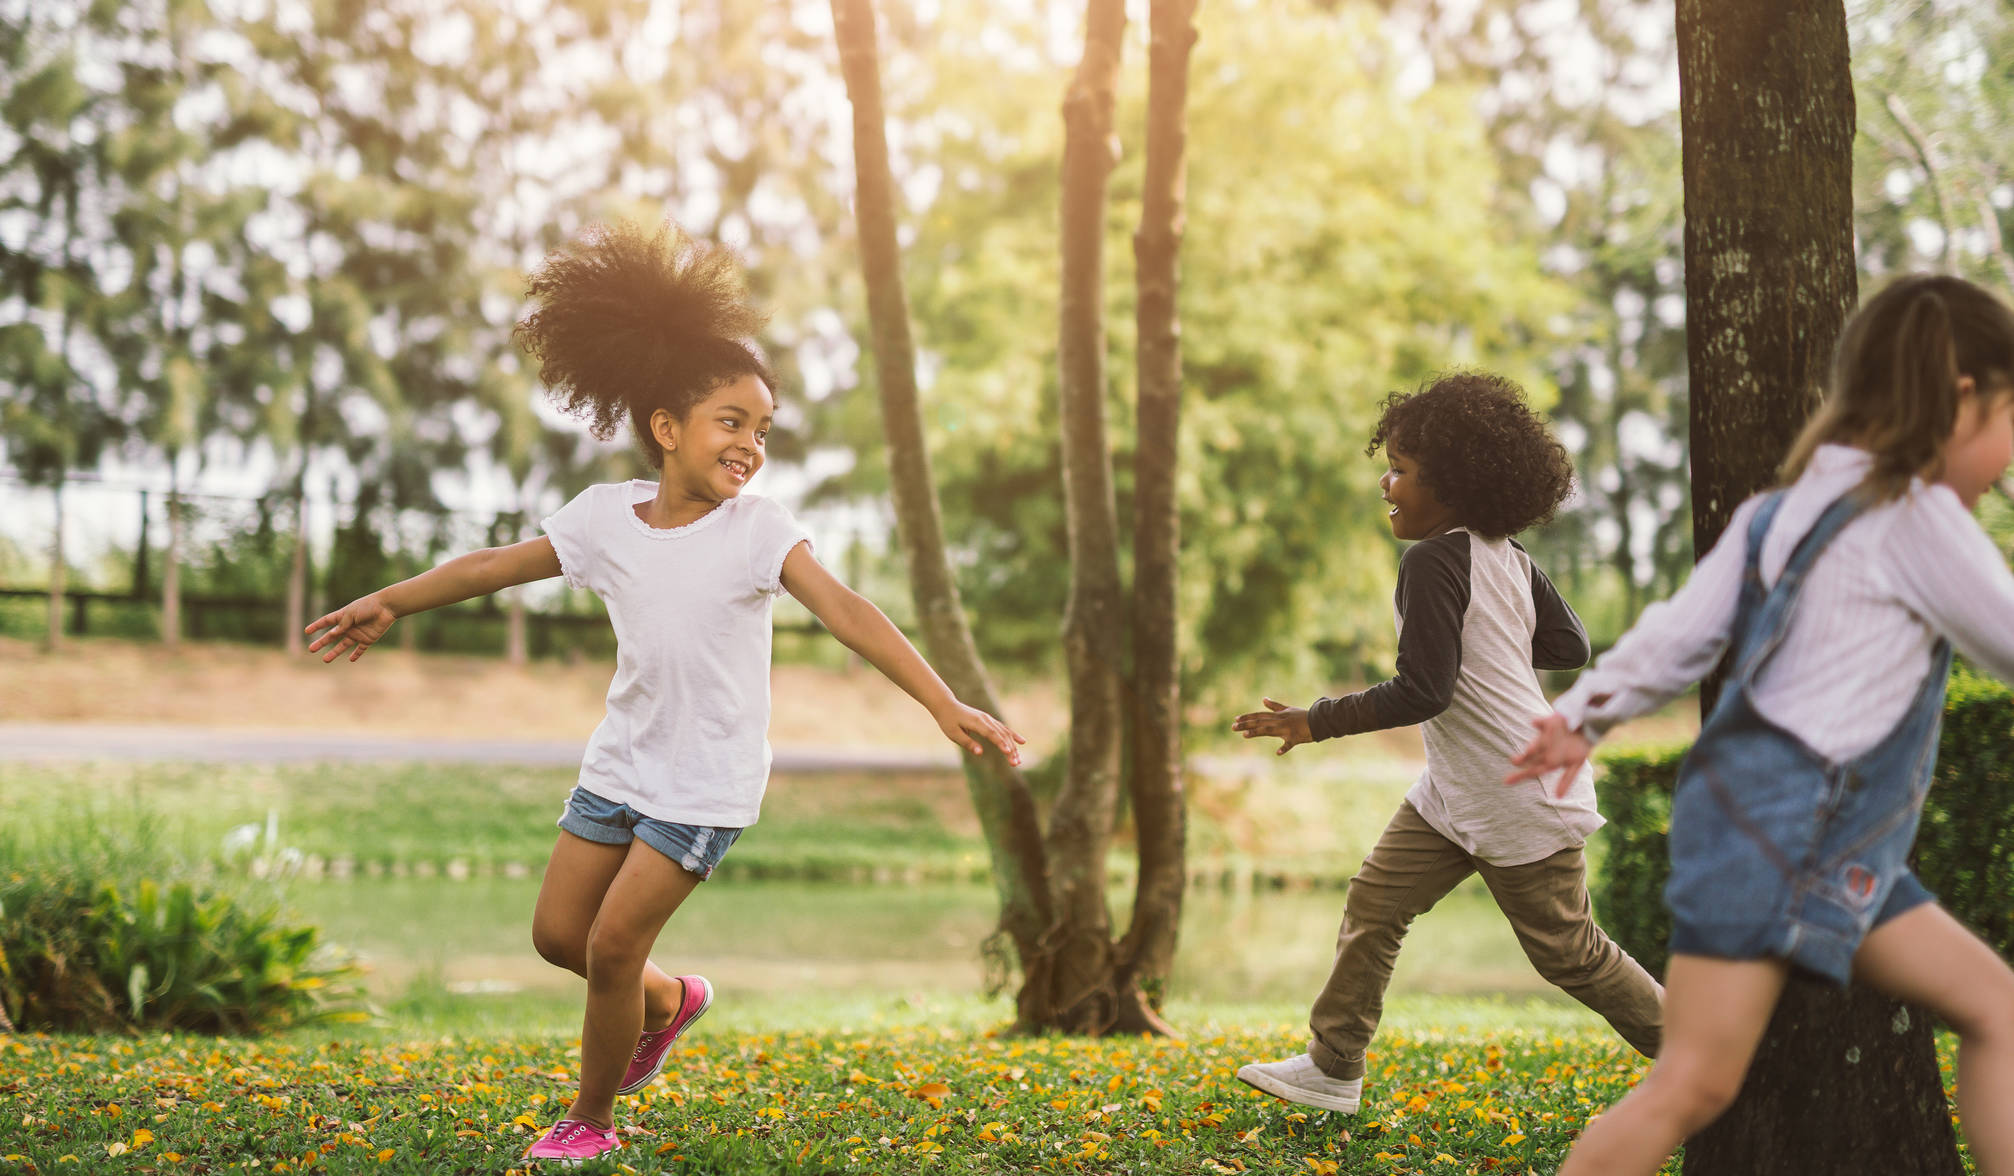 How Movement and Exercise Help Kids Learn | KQED